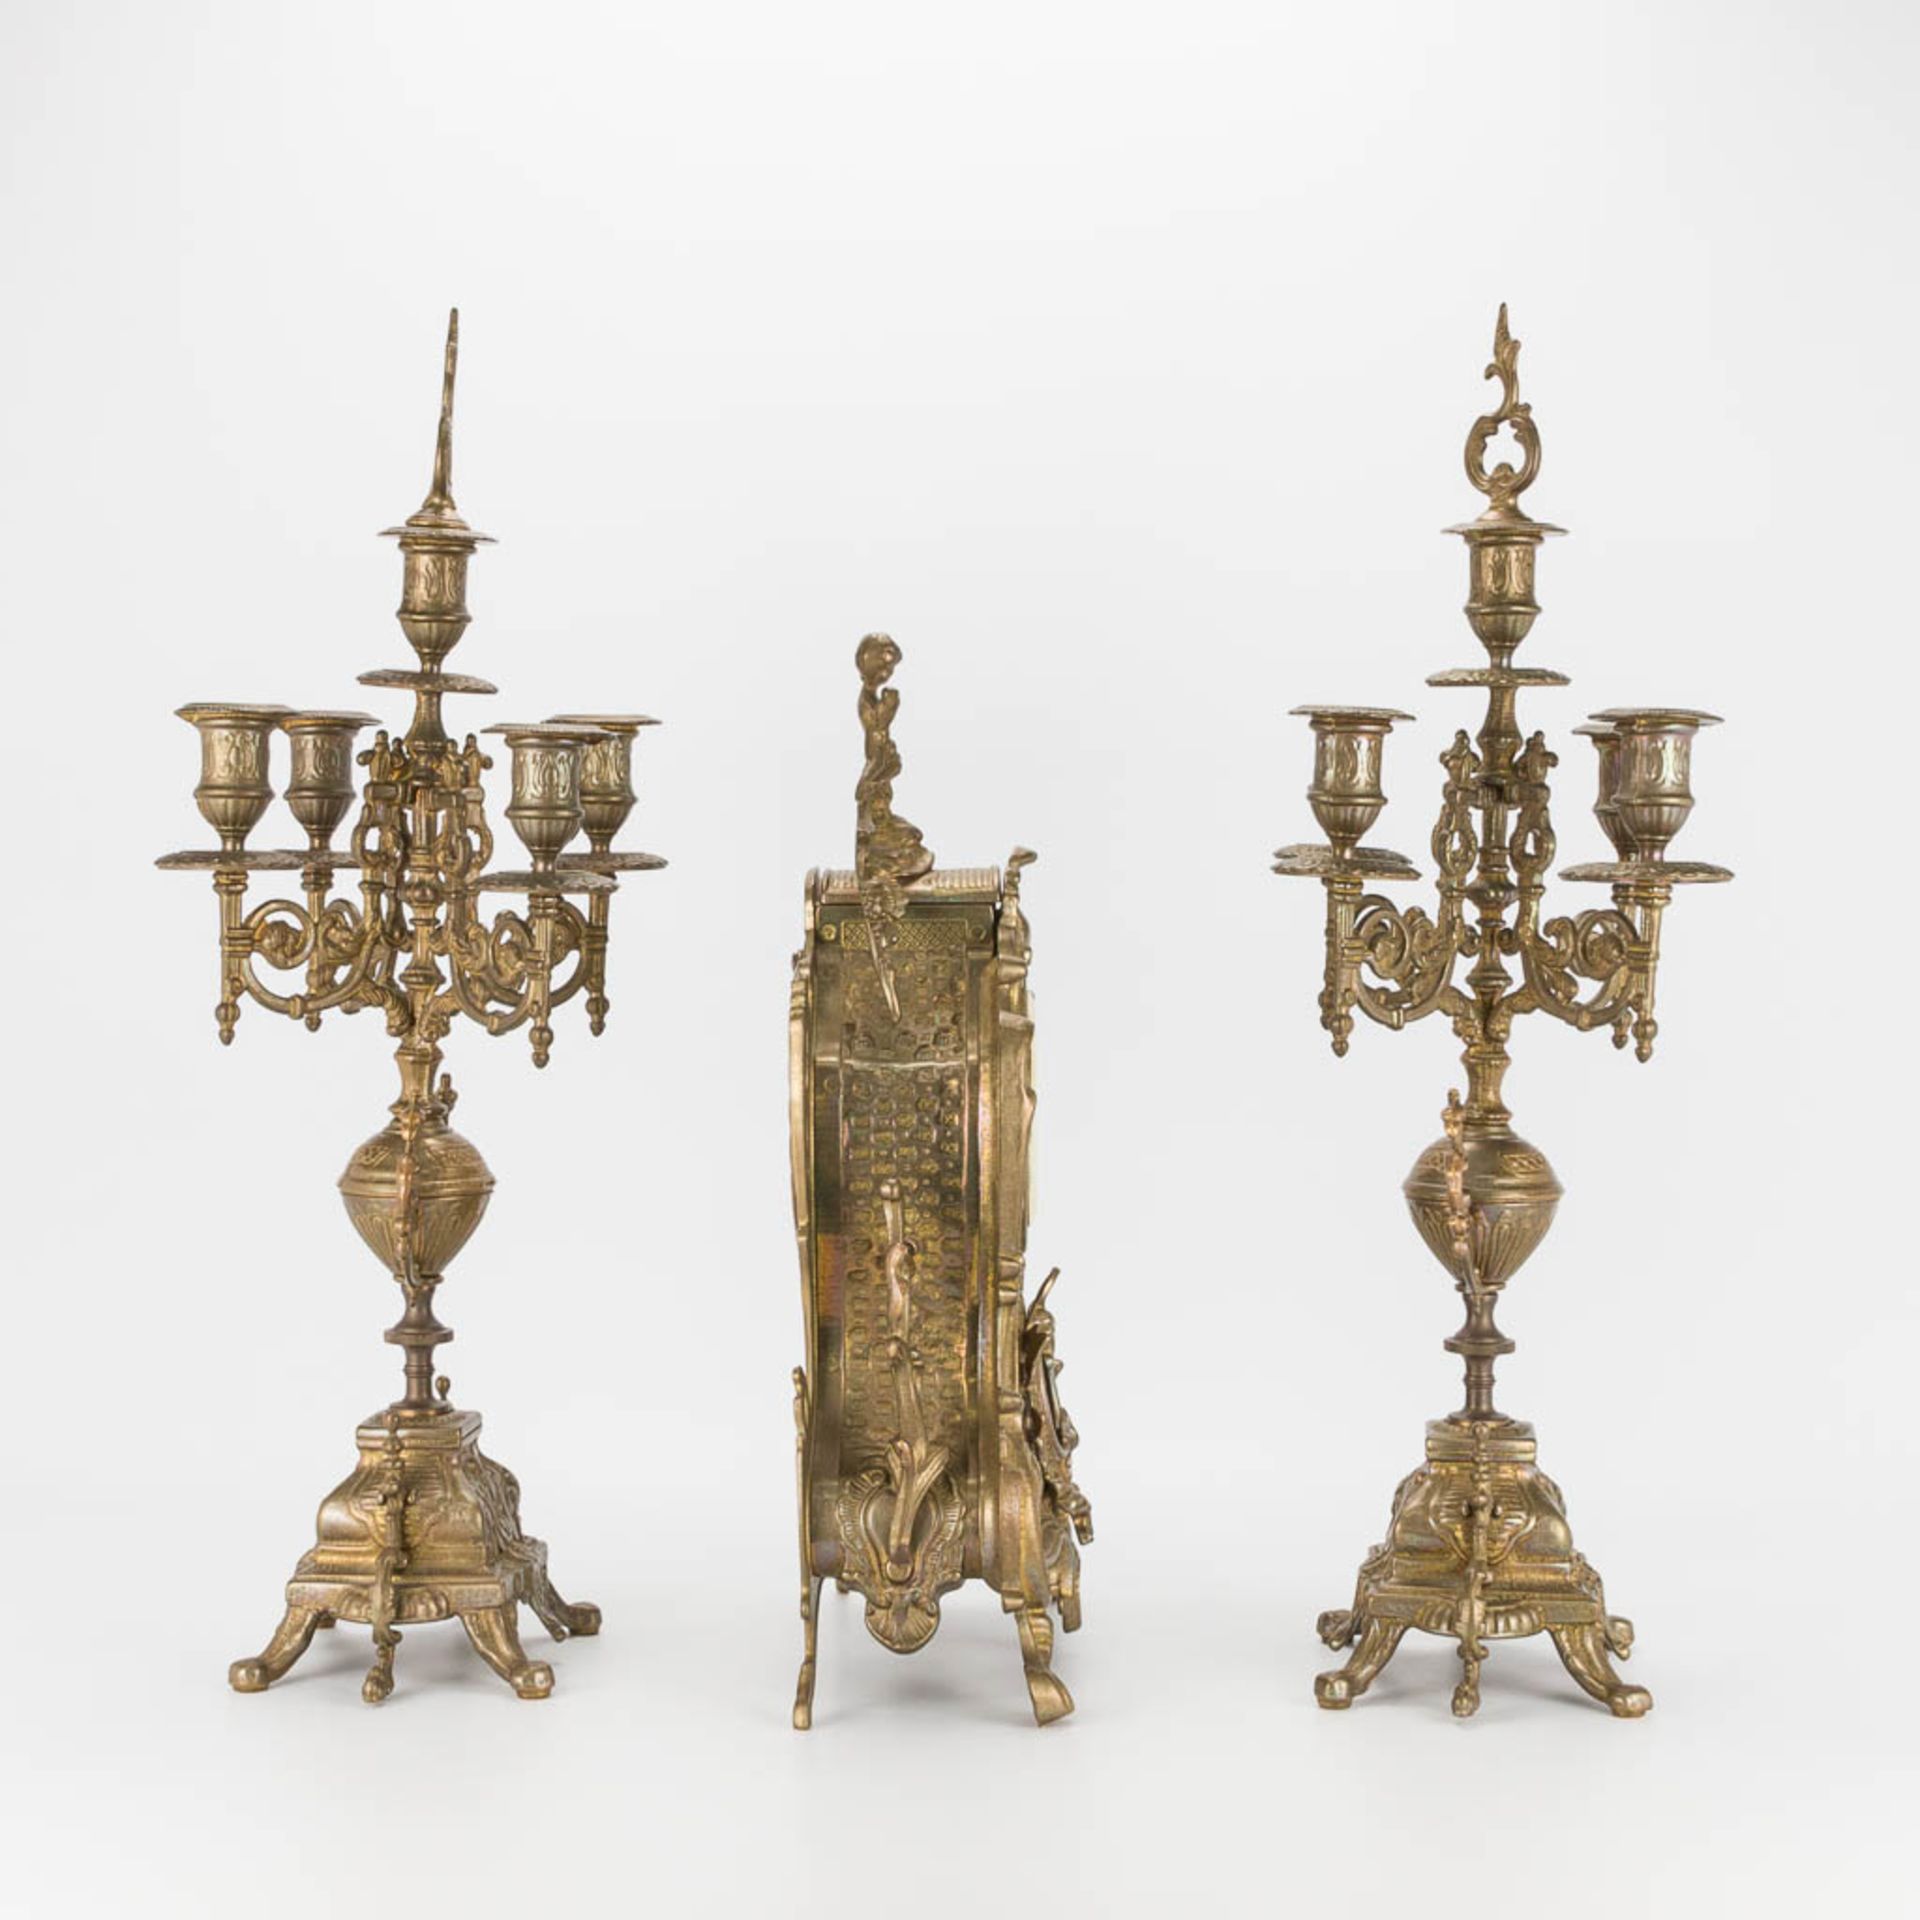 A bronze 3-piece garniture with clock and candelabra. The second half of the 20th century. (22 x 22 - Image 3 of 16